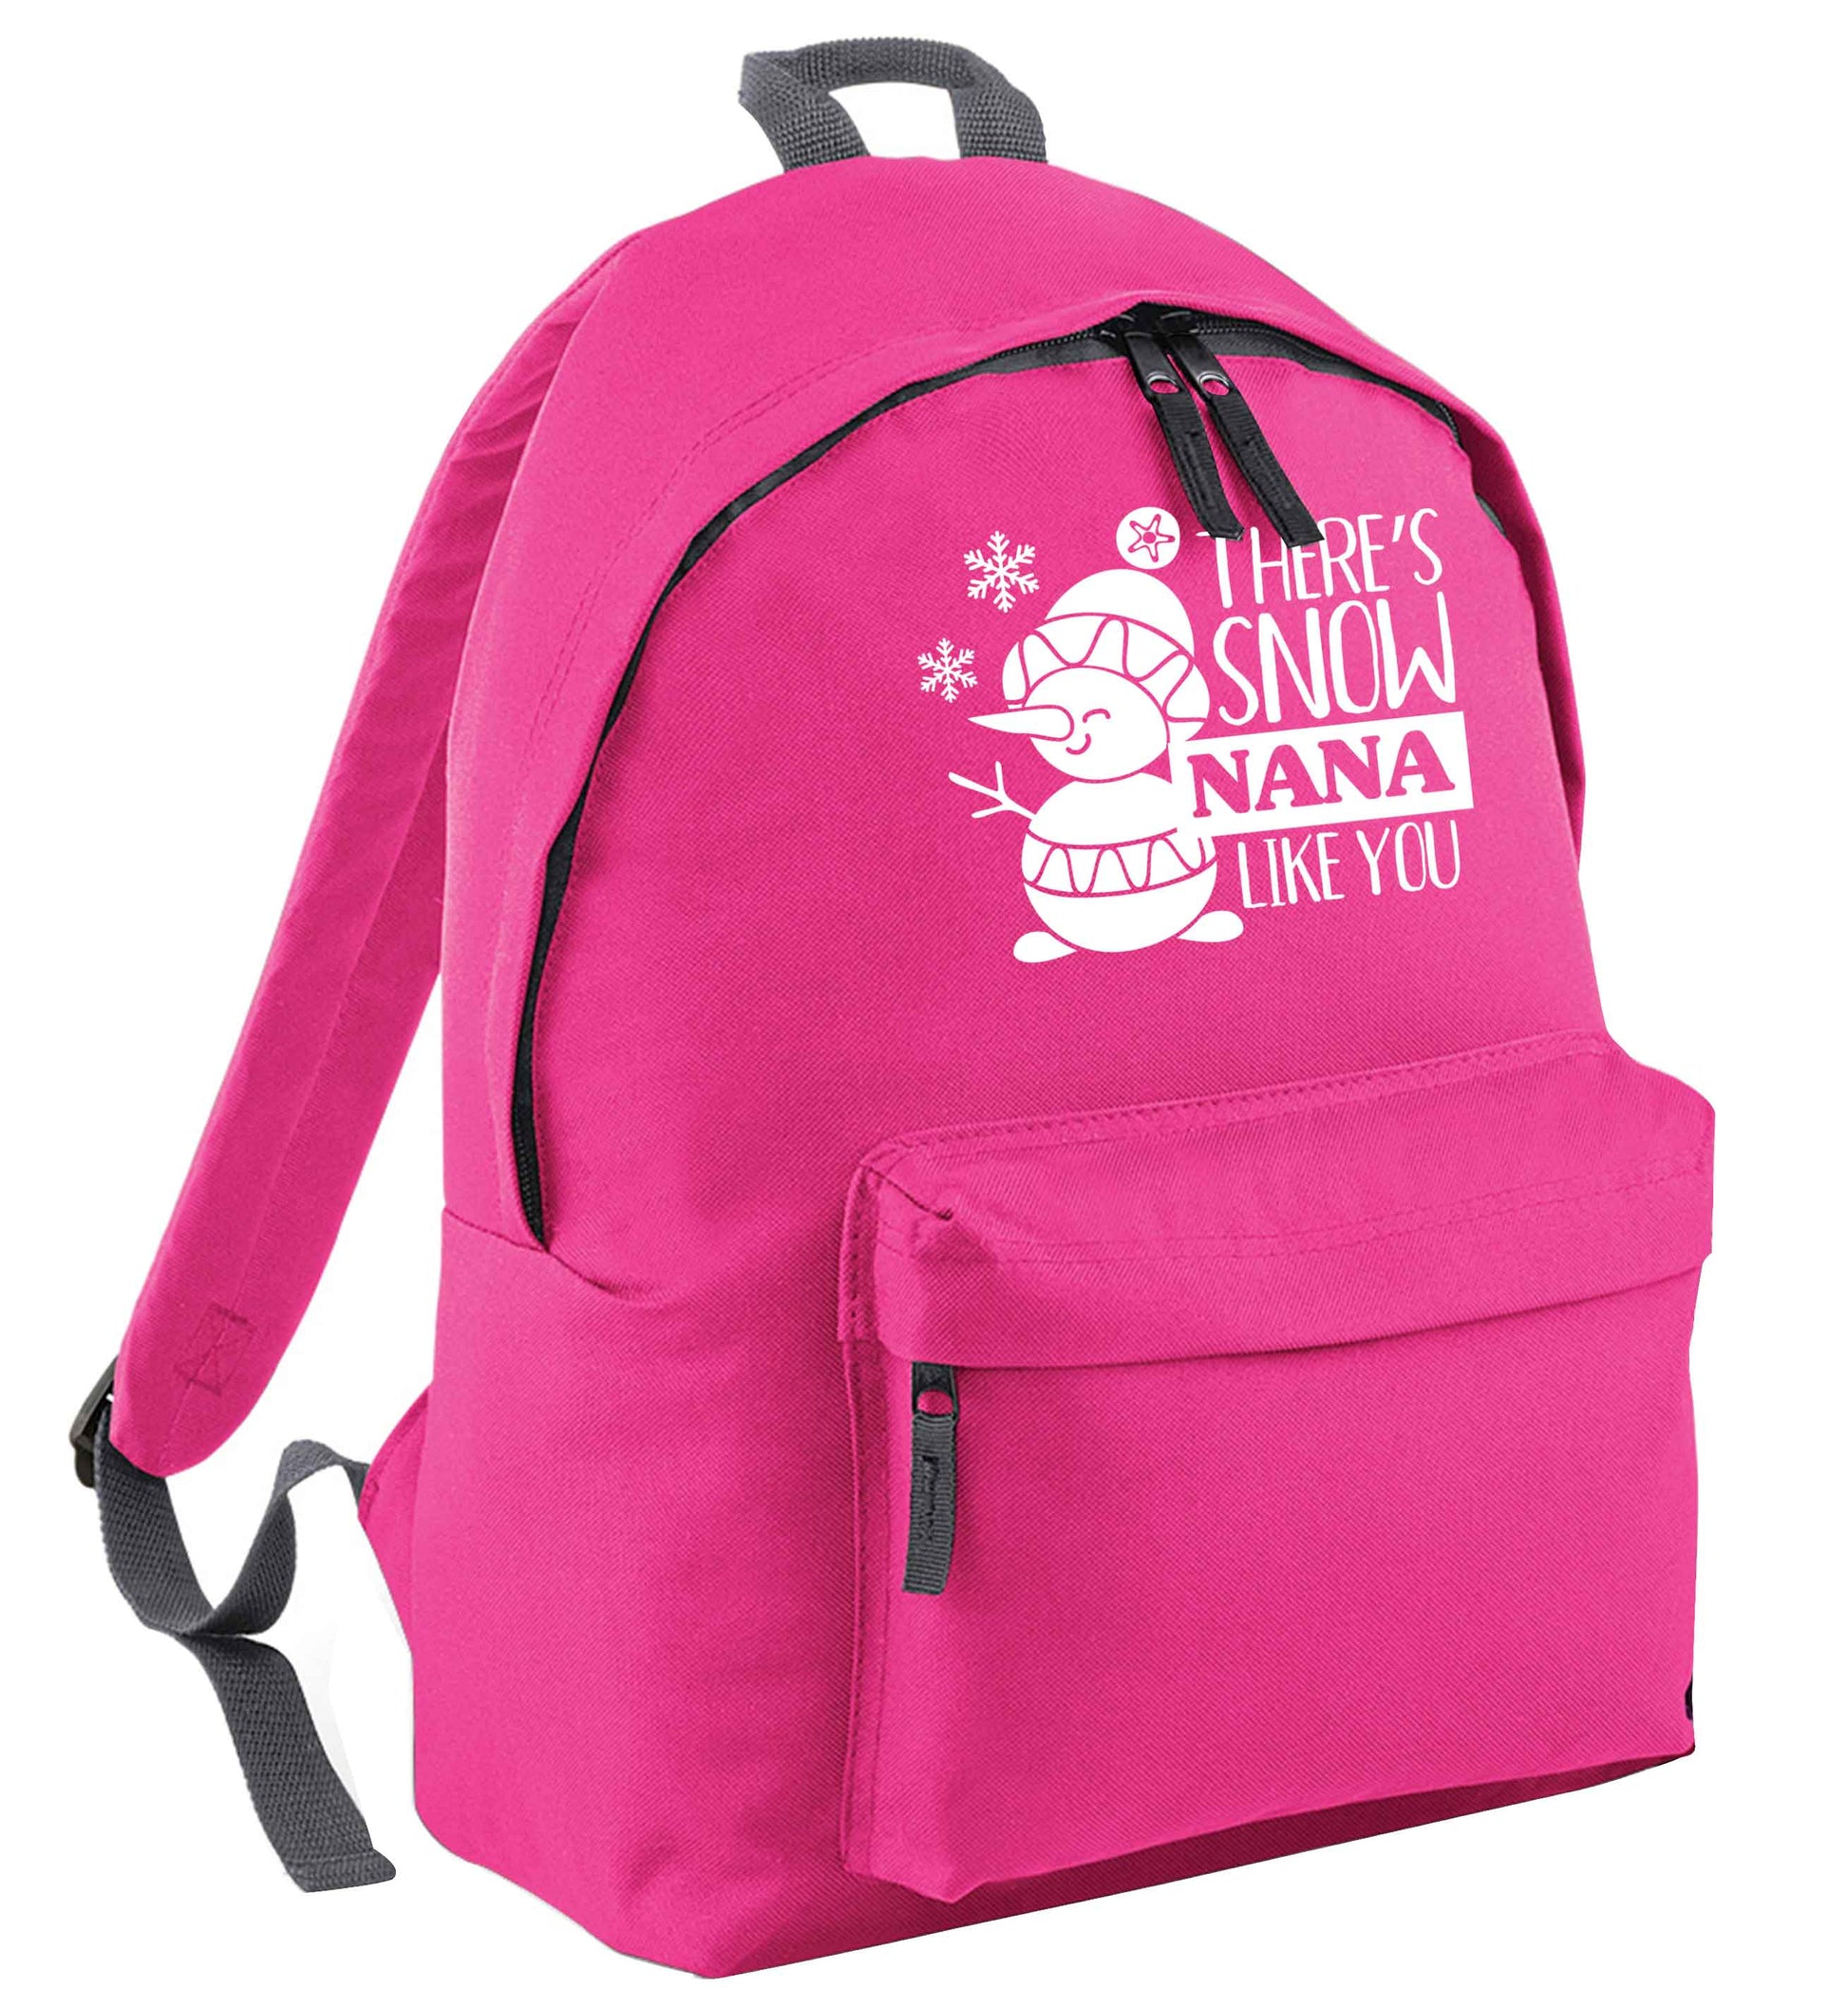 There's snow nana like you pink adults backpack